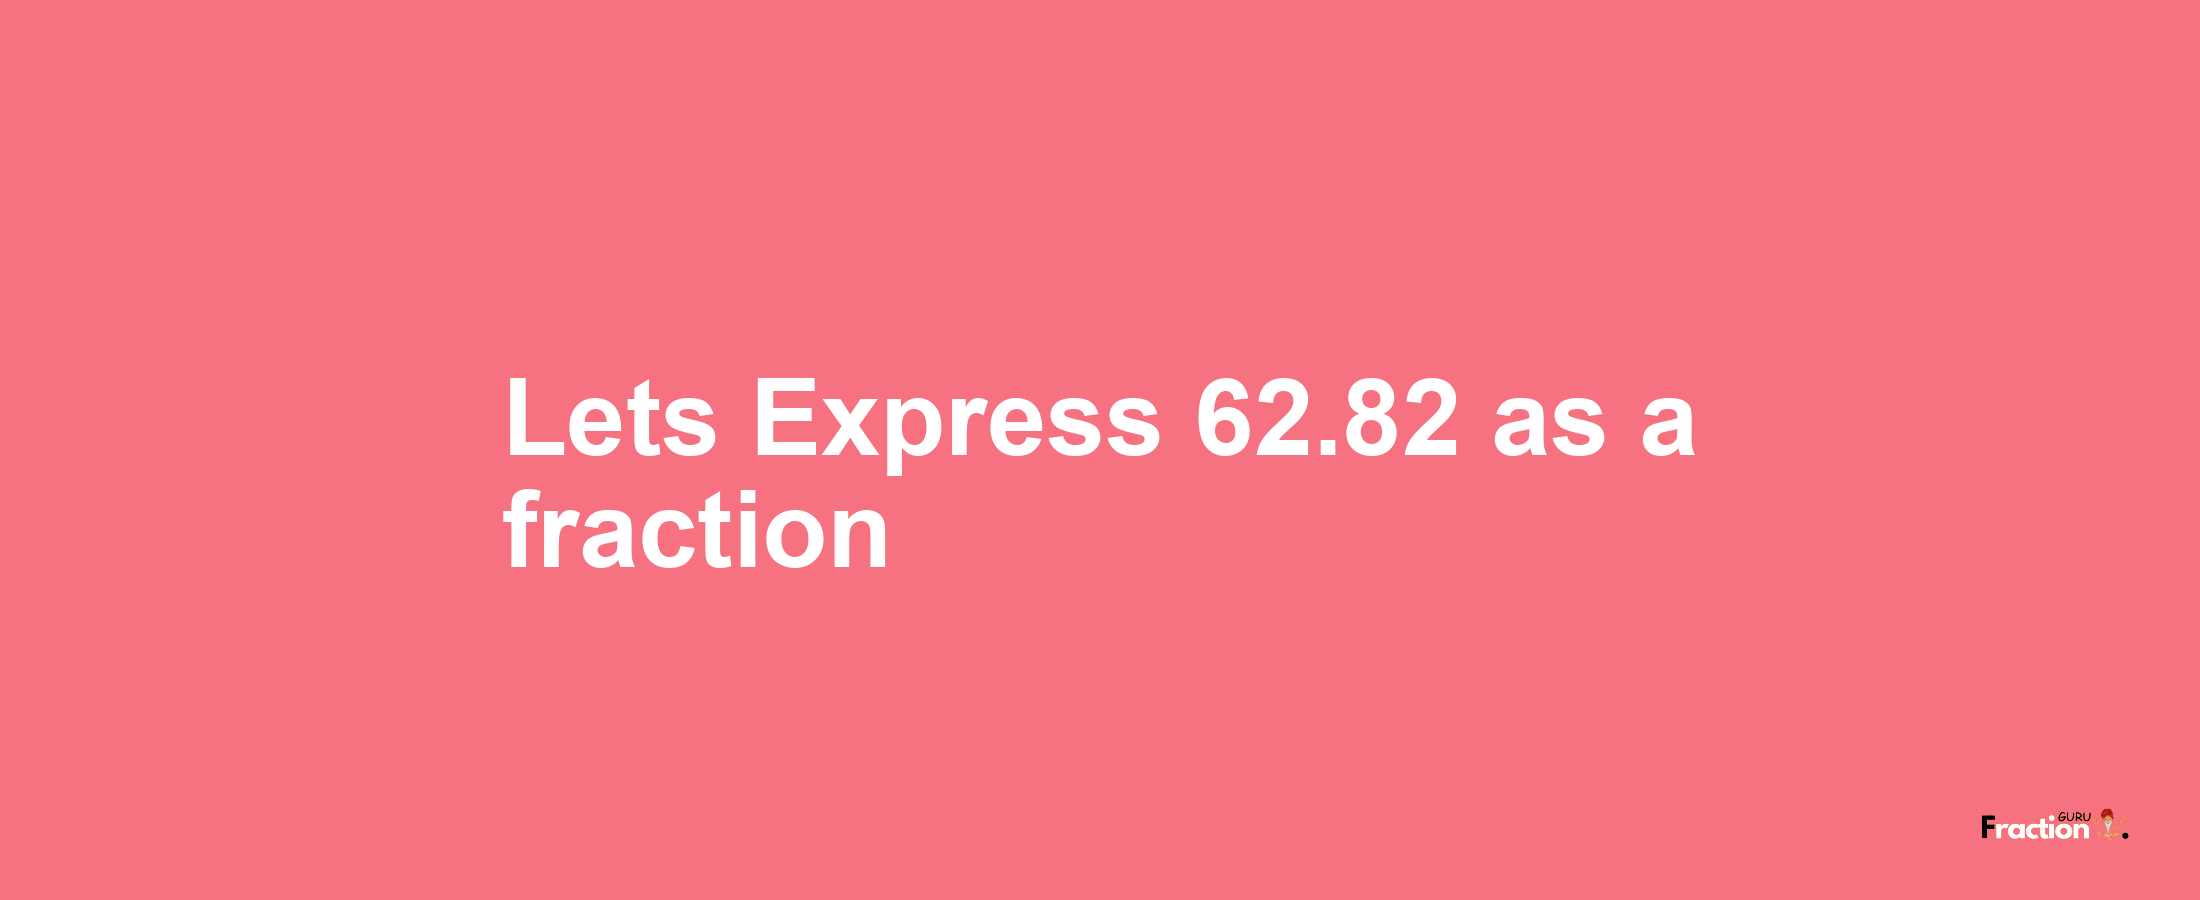 Lets Express 62.82 as afraction